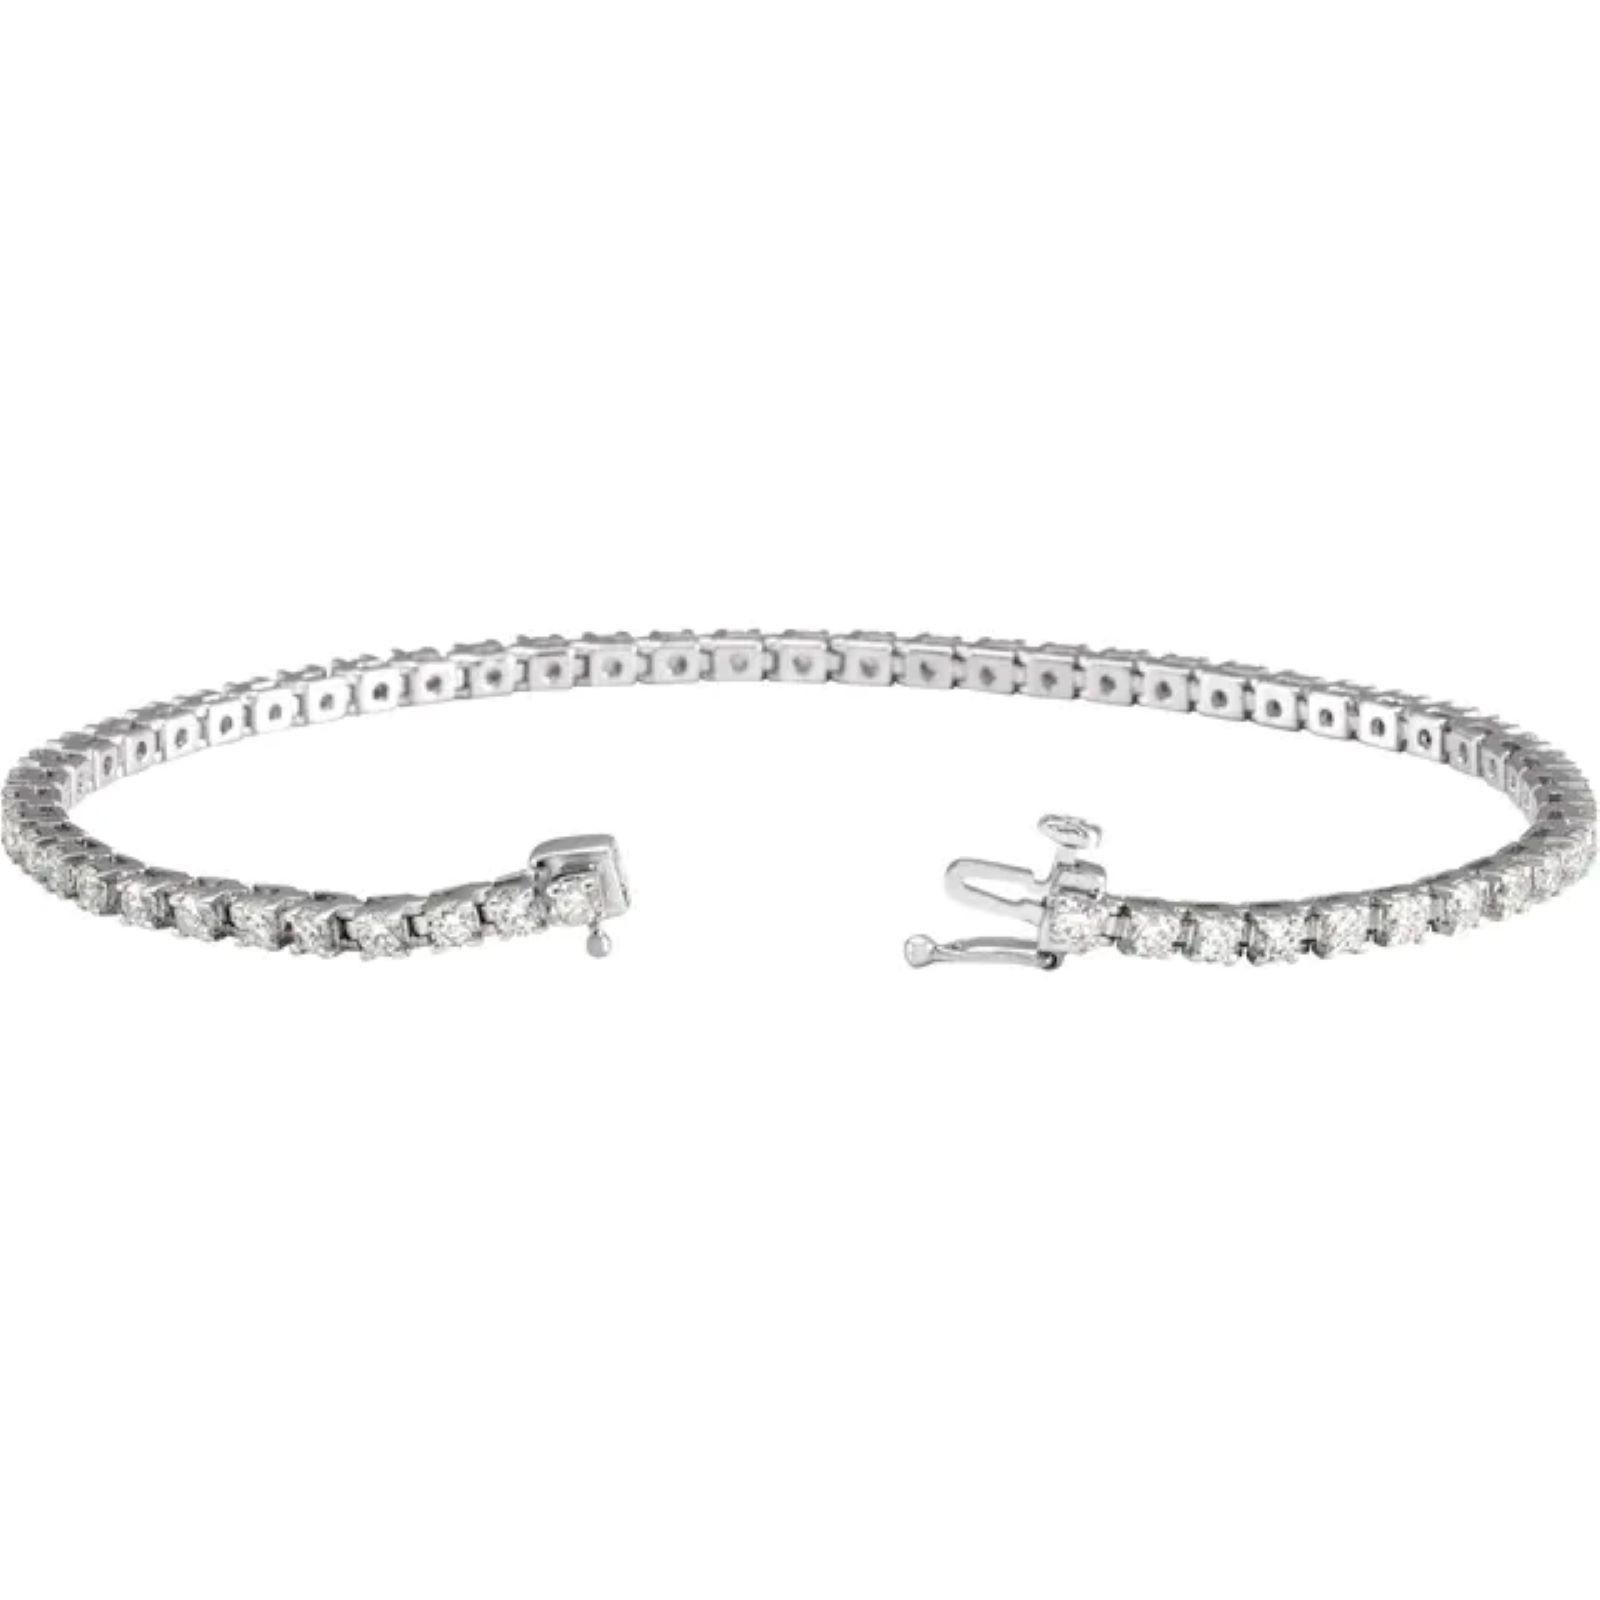 Specifications
Weight:	8.01 DWT (12.46 grams)
Solid/Hollow:	Solid
Bracelet/Anklet Size:	7 1/4 In
Primary Stone Type:	Natural Diamond
Prong Count:	4-prong
Bracelet Closure Type:	Hidden Clasp
Bracelet Type:	Line
Selling Unit of